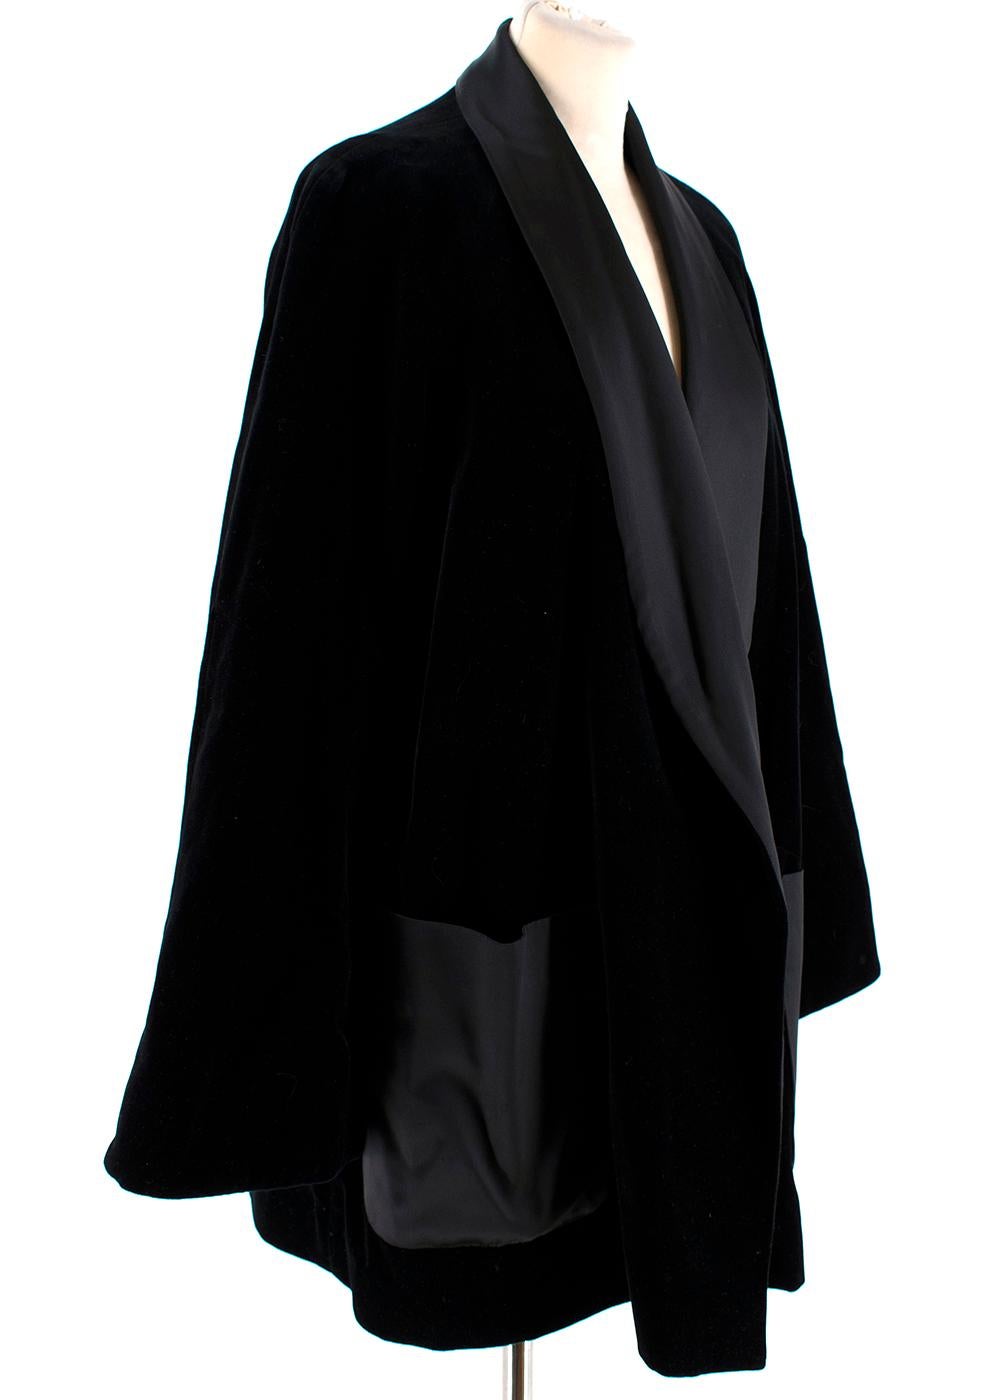 Rosetta Getty Black Velvet Satin Detail Shawl Jacket

- Soft crushed velvet feel 
- Oversized smoking jacket style 
- Satin finish lapels and front patch pockets 

PLEASE NOTE - The belt is missing and will not be included for this item, this can be